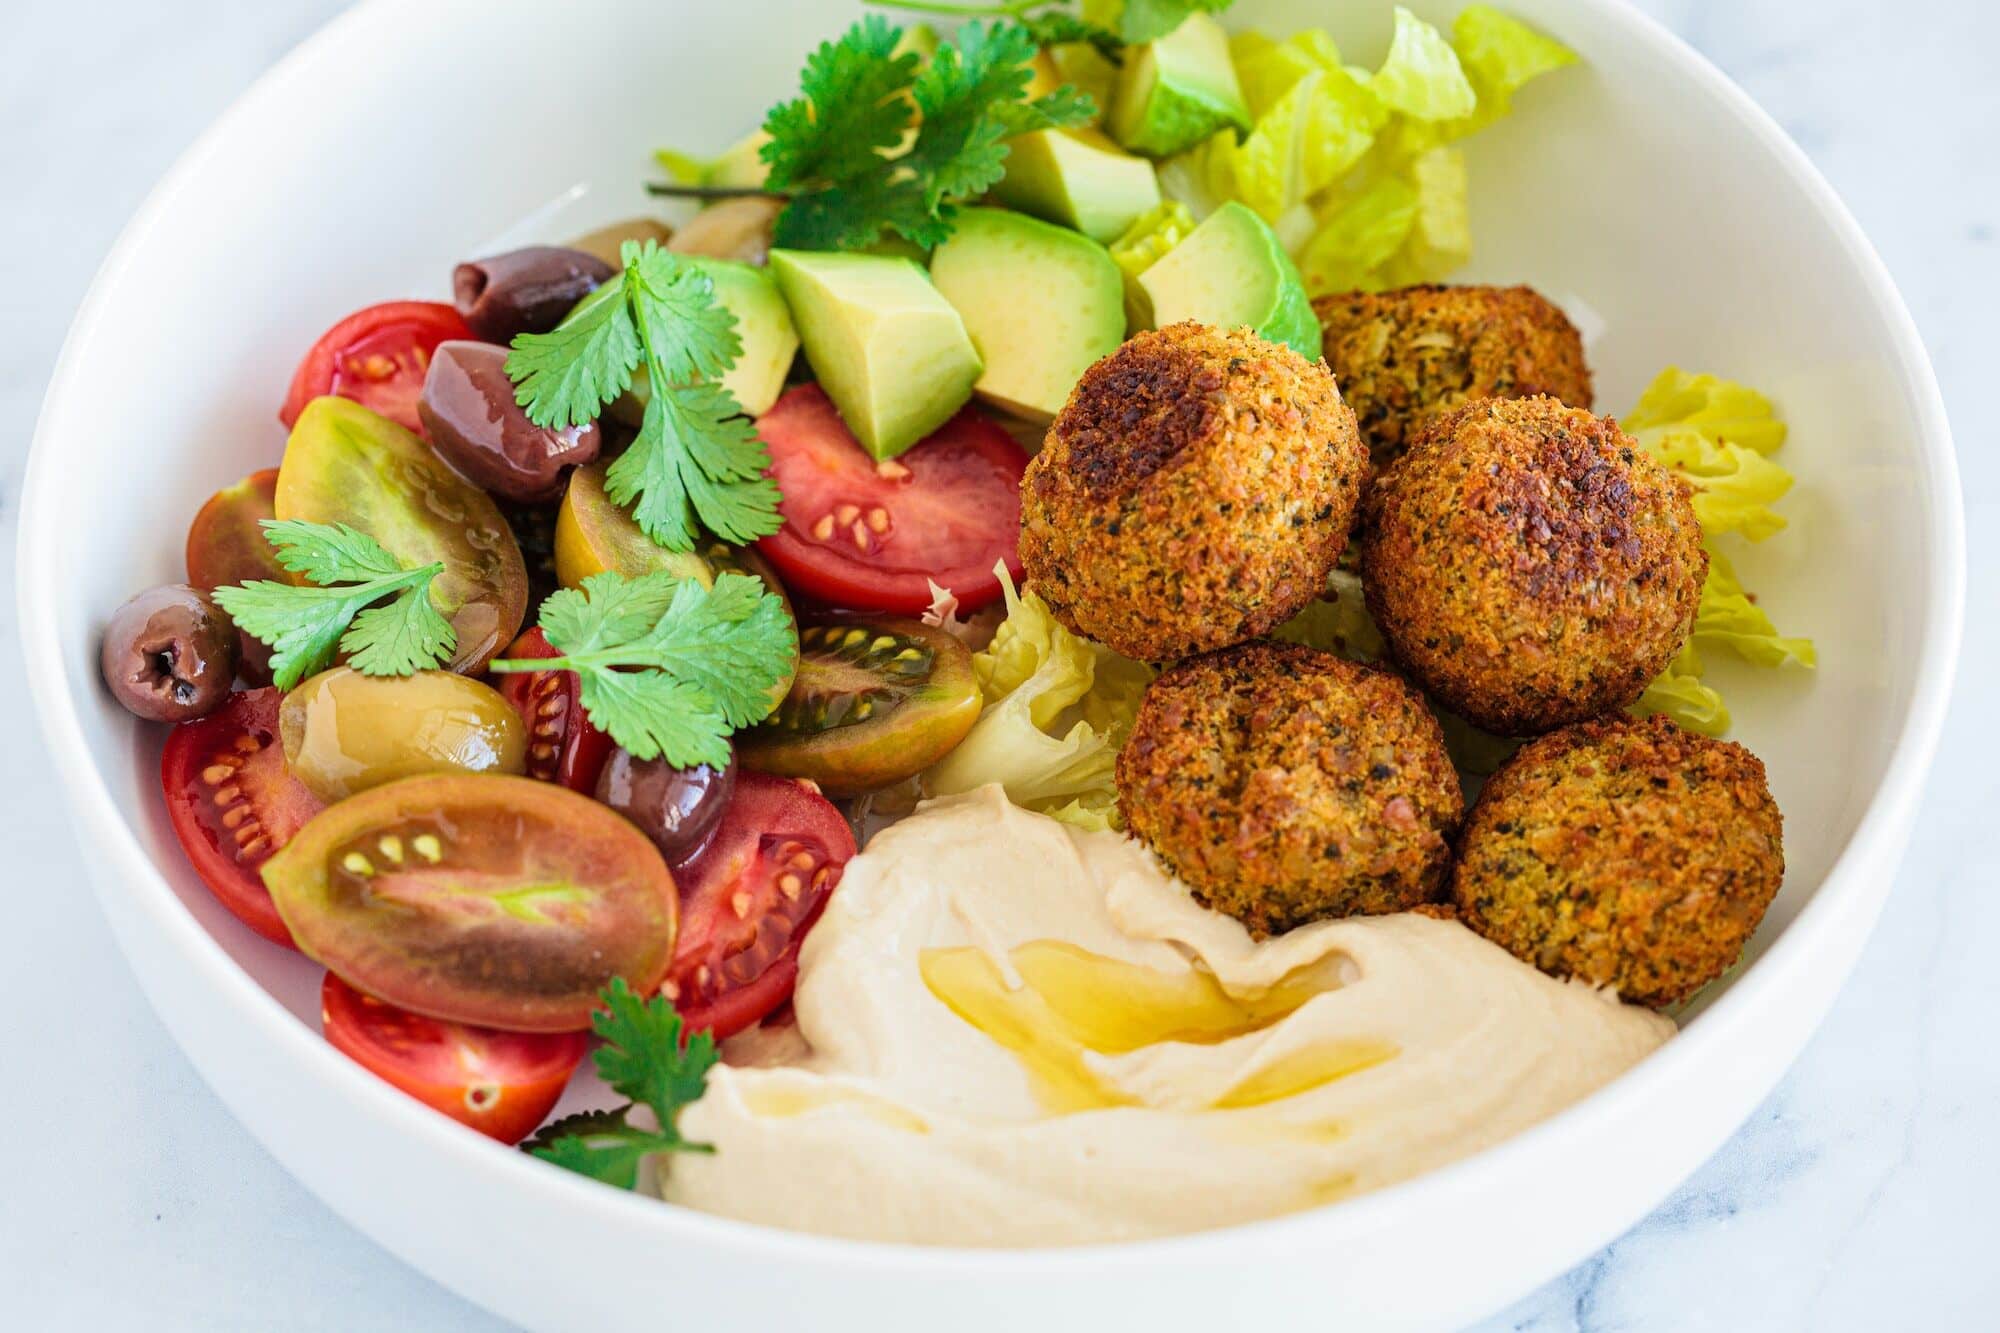 Falafel plate with salad, tomatoes, avocado, hummus and olives.